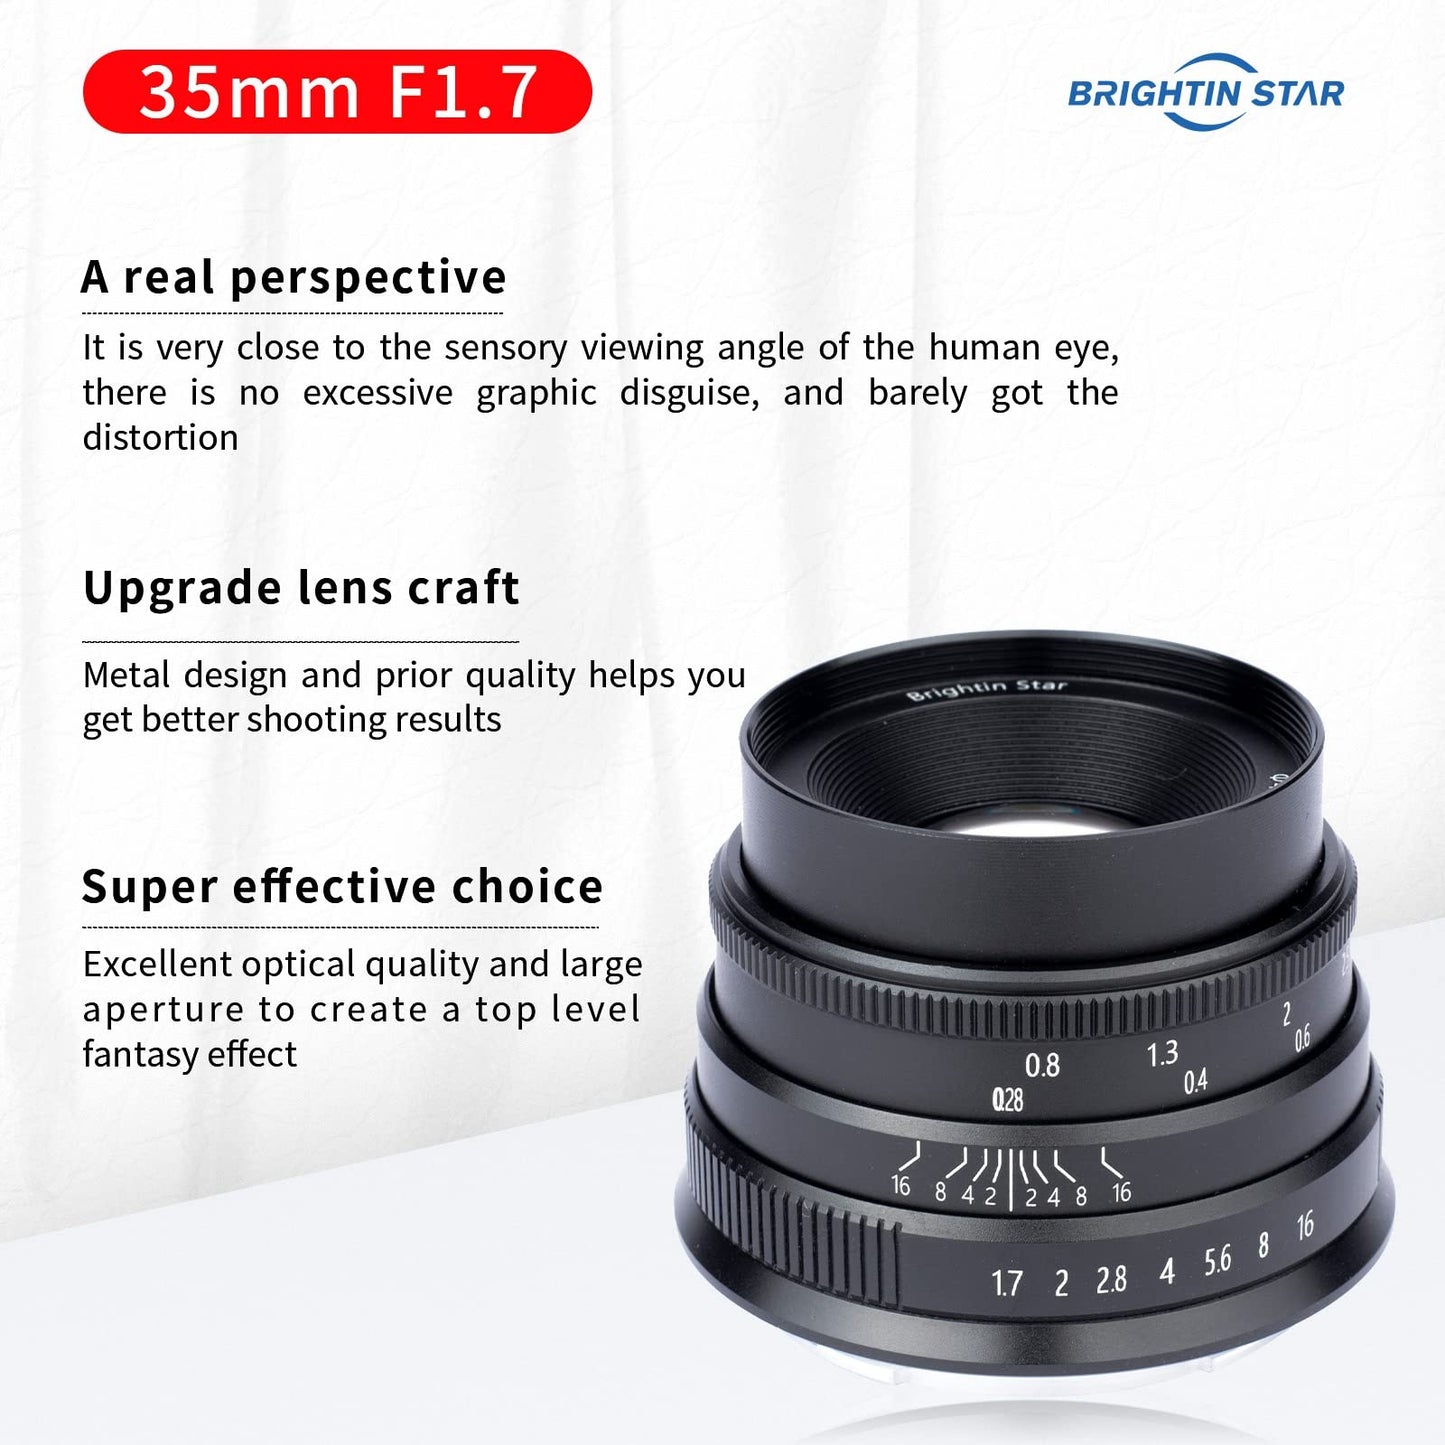 35mm F1.7 Wide-Angle Manual Focus Prime Lens for Fuji X Mount